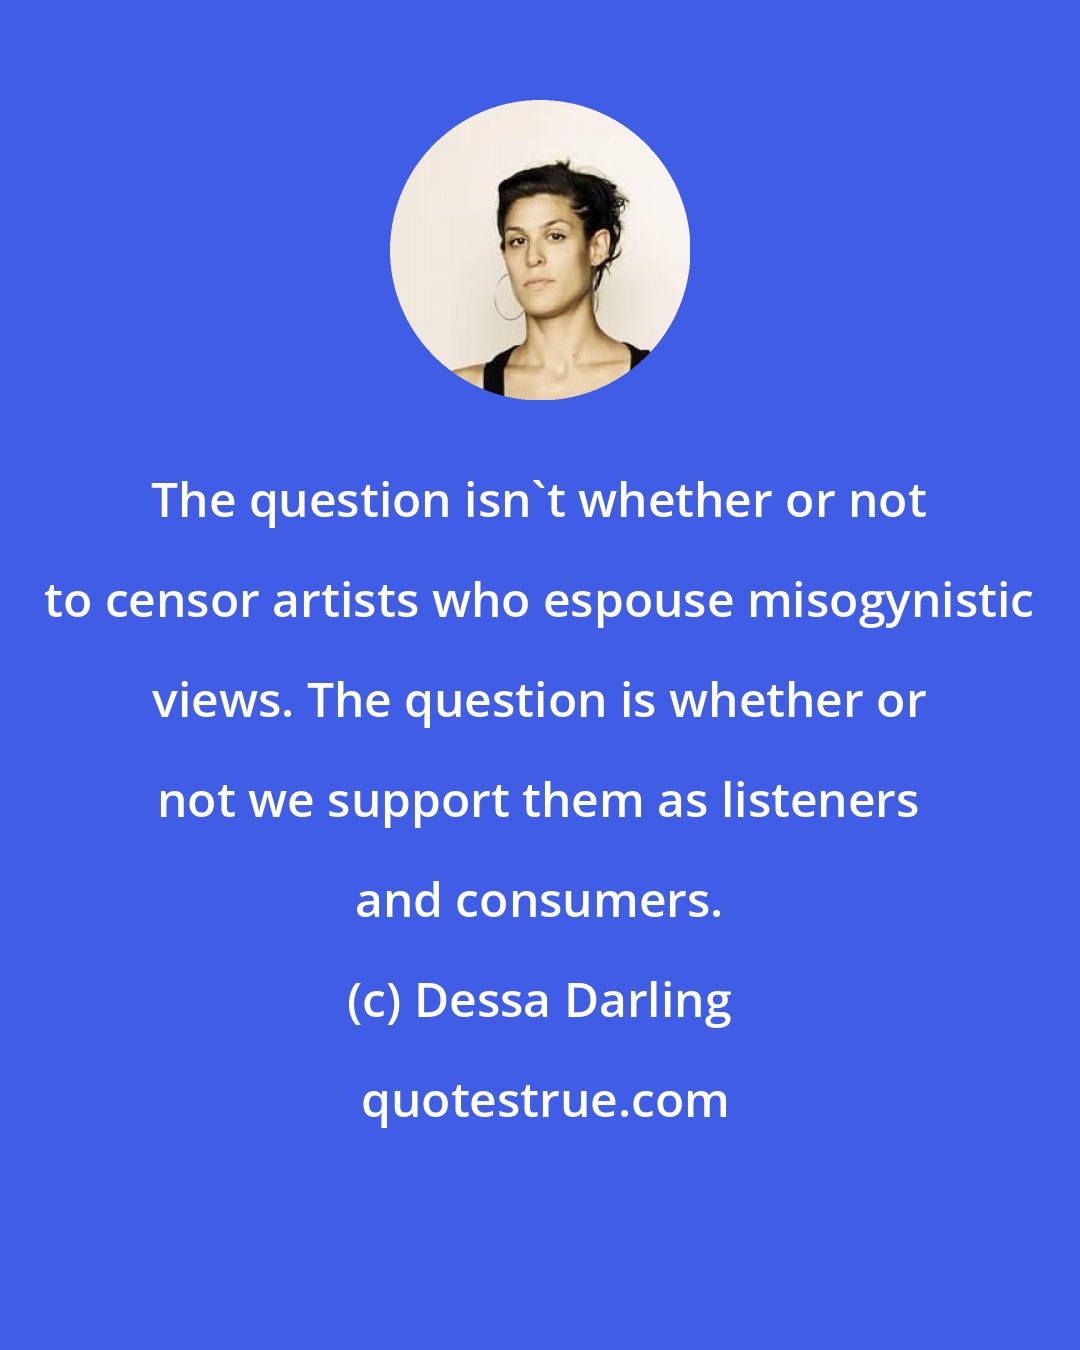 Dessa Darling: The question isn't whether or not to censor artists who espouse misogynistic views. The question is whether or not we support them as listeners and consumers.